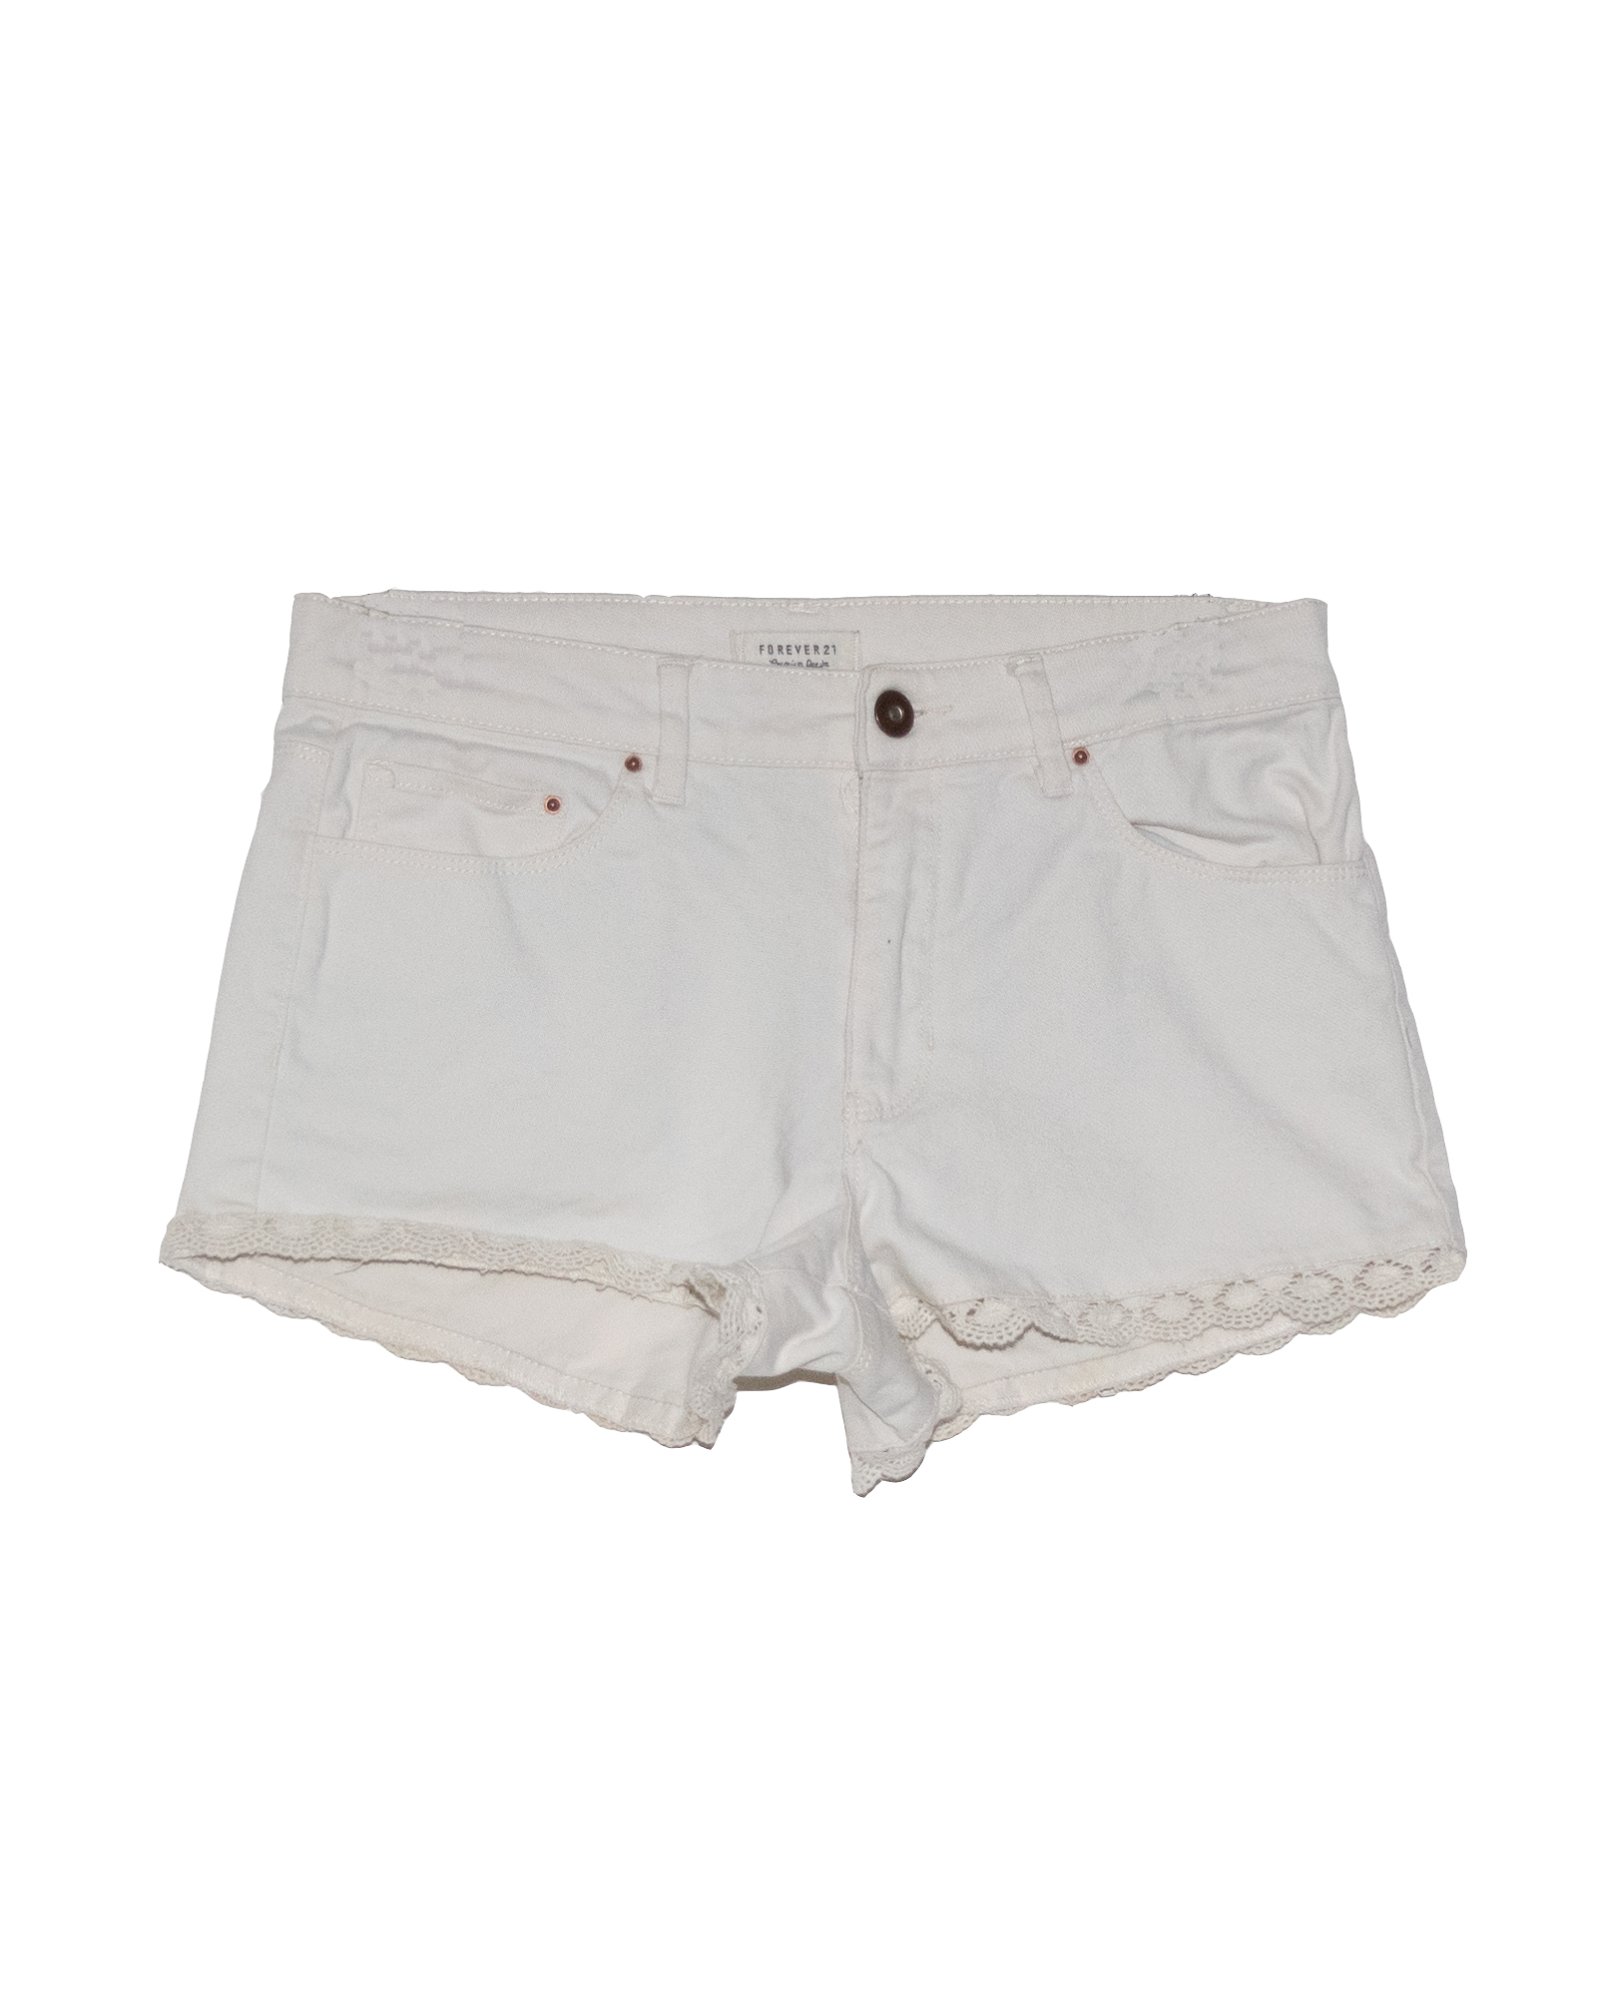 Shorts Casuales